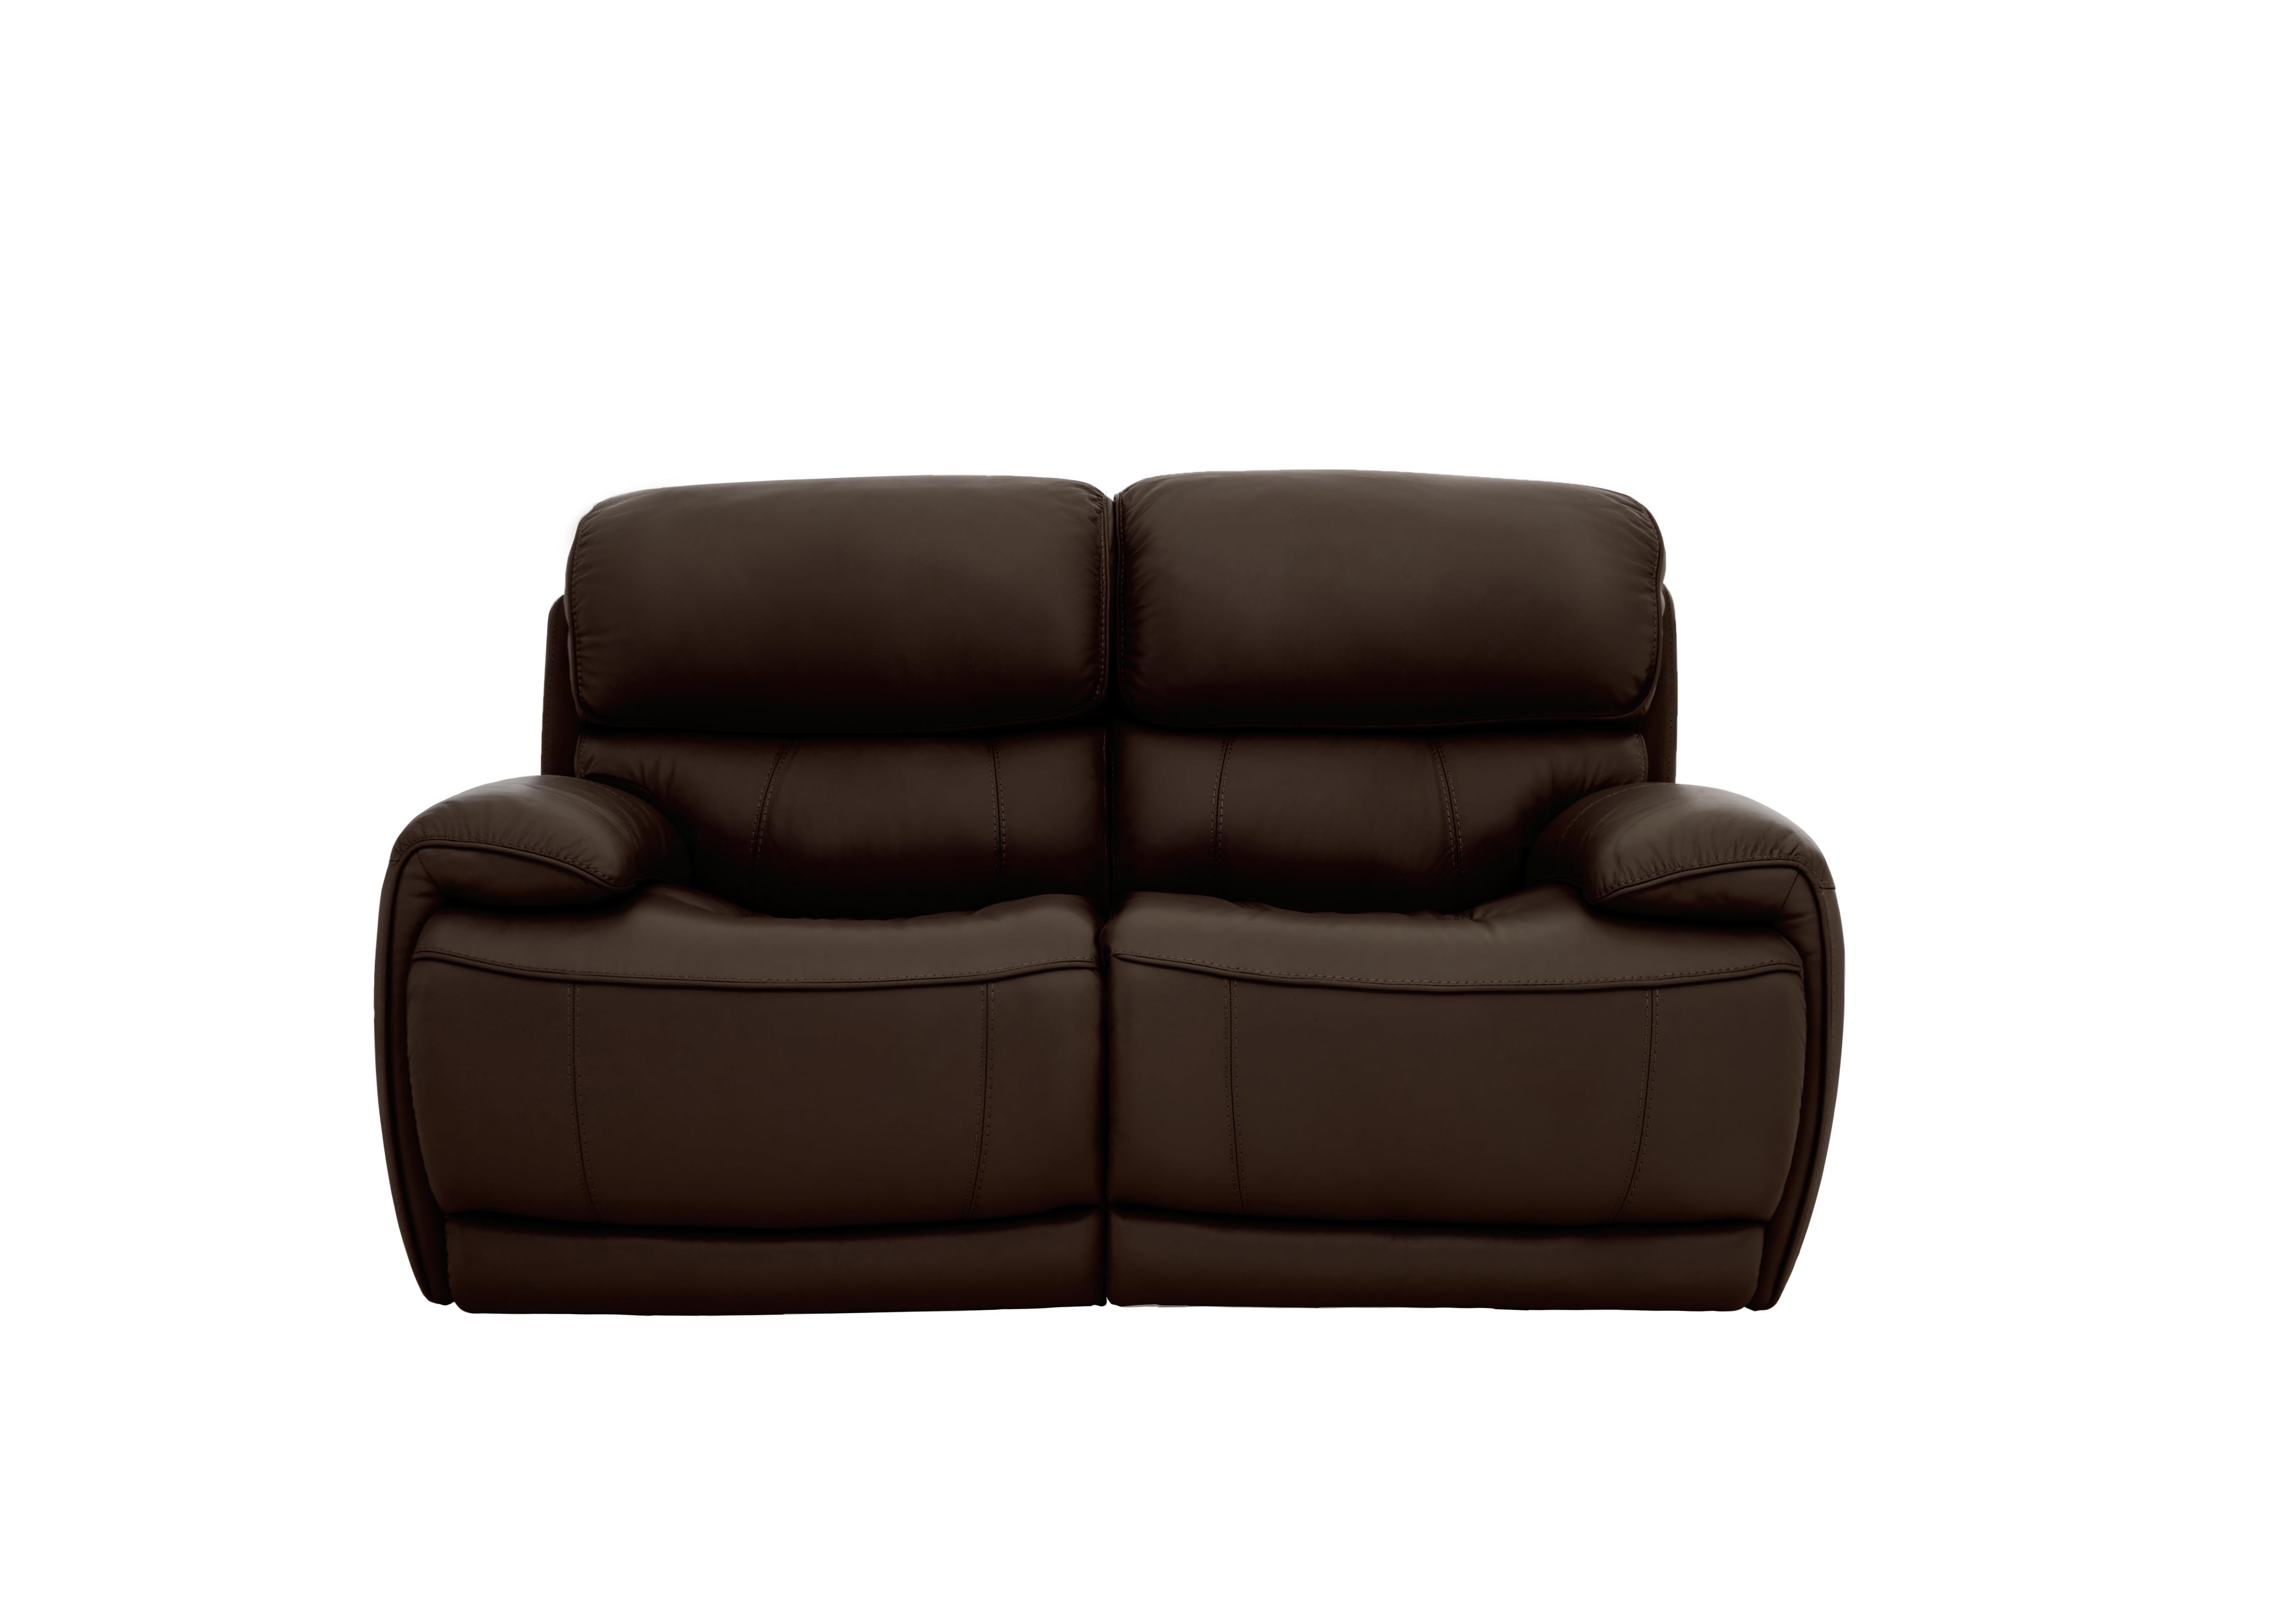 Rocco 2 Seater Leather Power Rocker Sofa with Power Headrests in Bv-1748 Dark Chocolate on Furniture Village